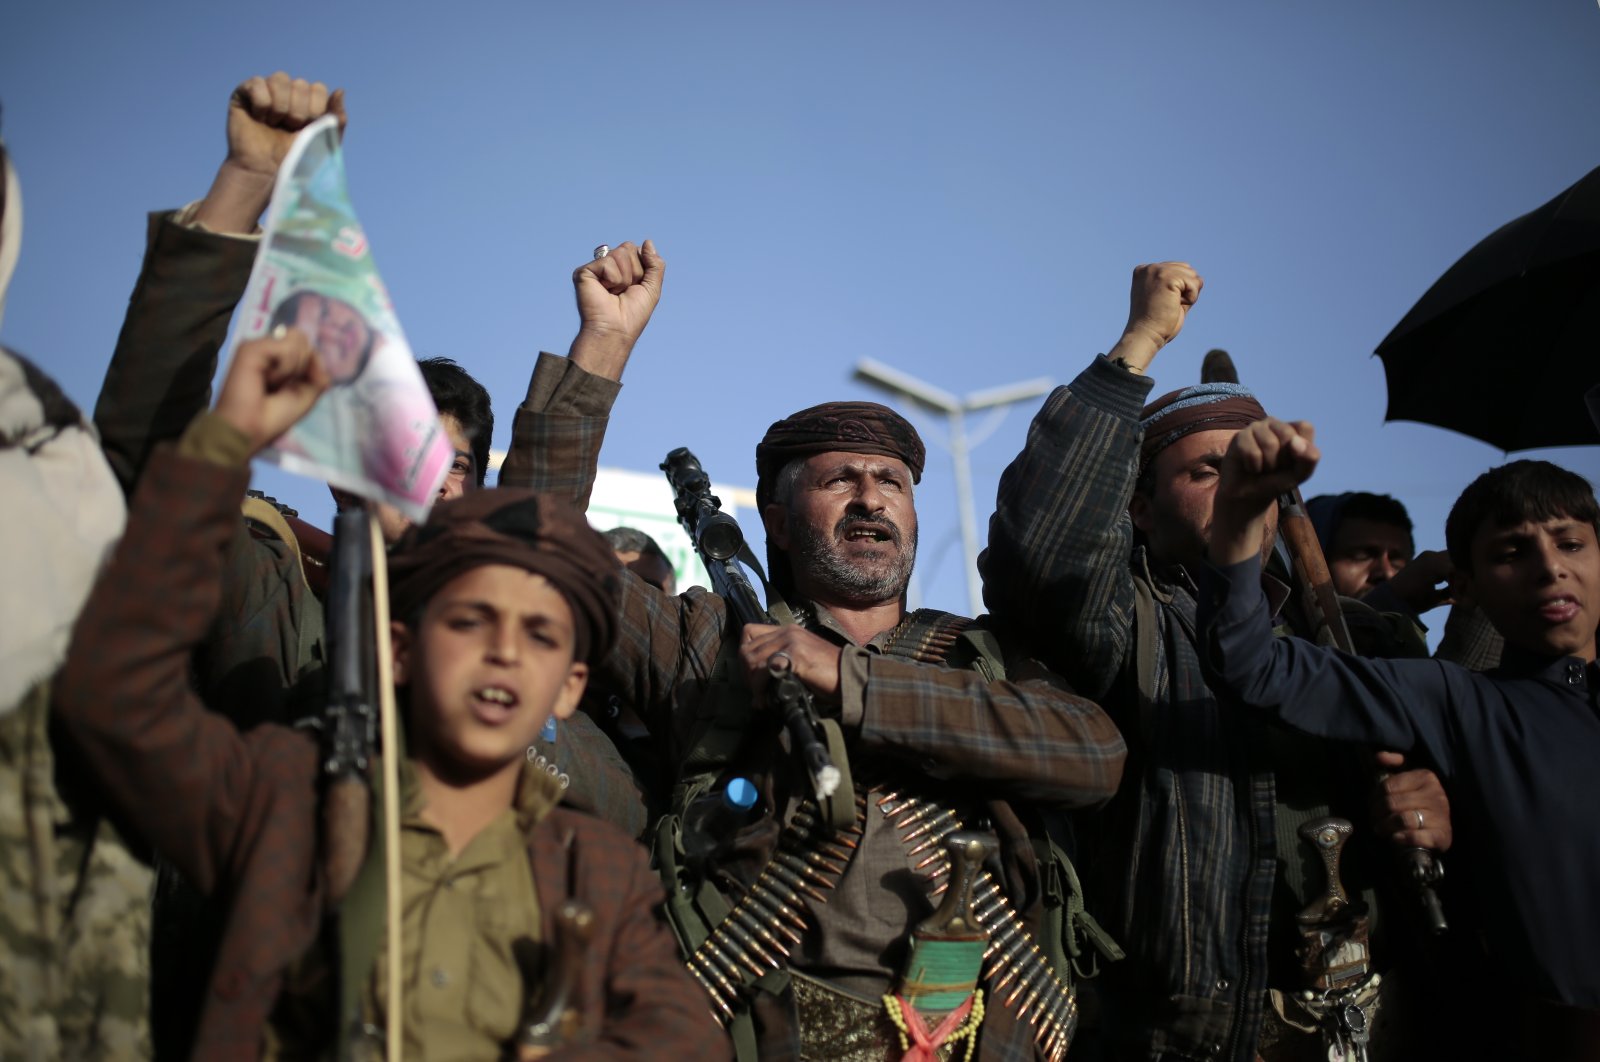 Houthi supporters chant slogans as they attend a demonstration against the United States over its decision to designate the Houthis a foreign terrorist organization in Sanaa, Yemen, Jan. 25, 2021. (AP Photo)